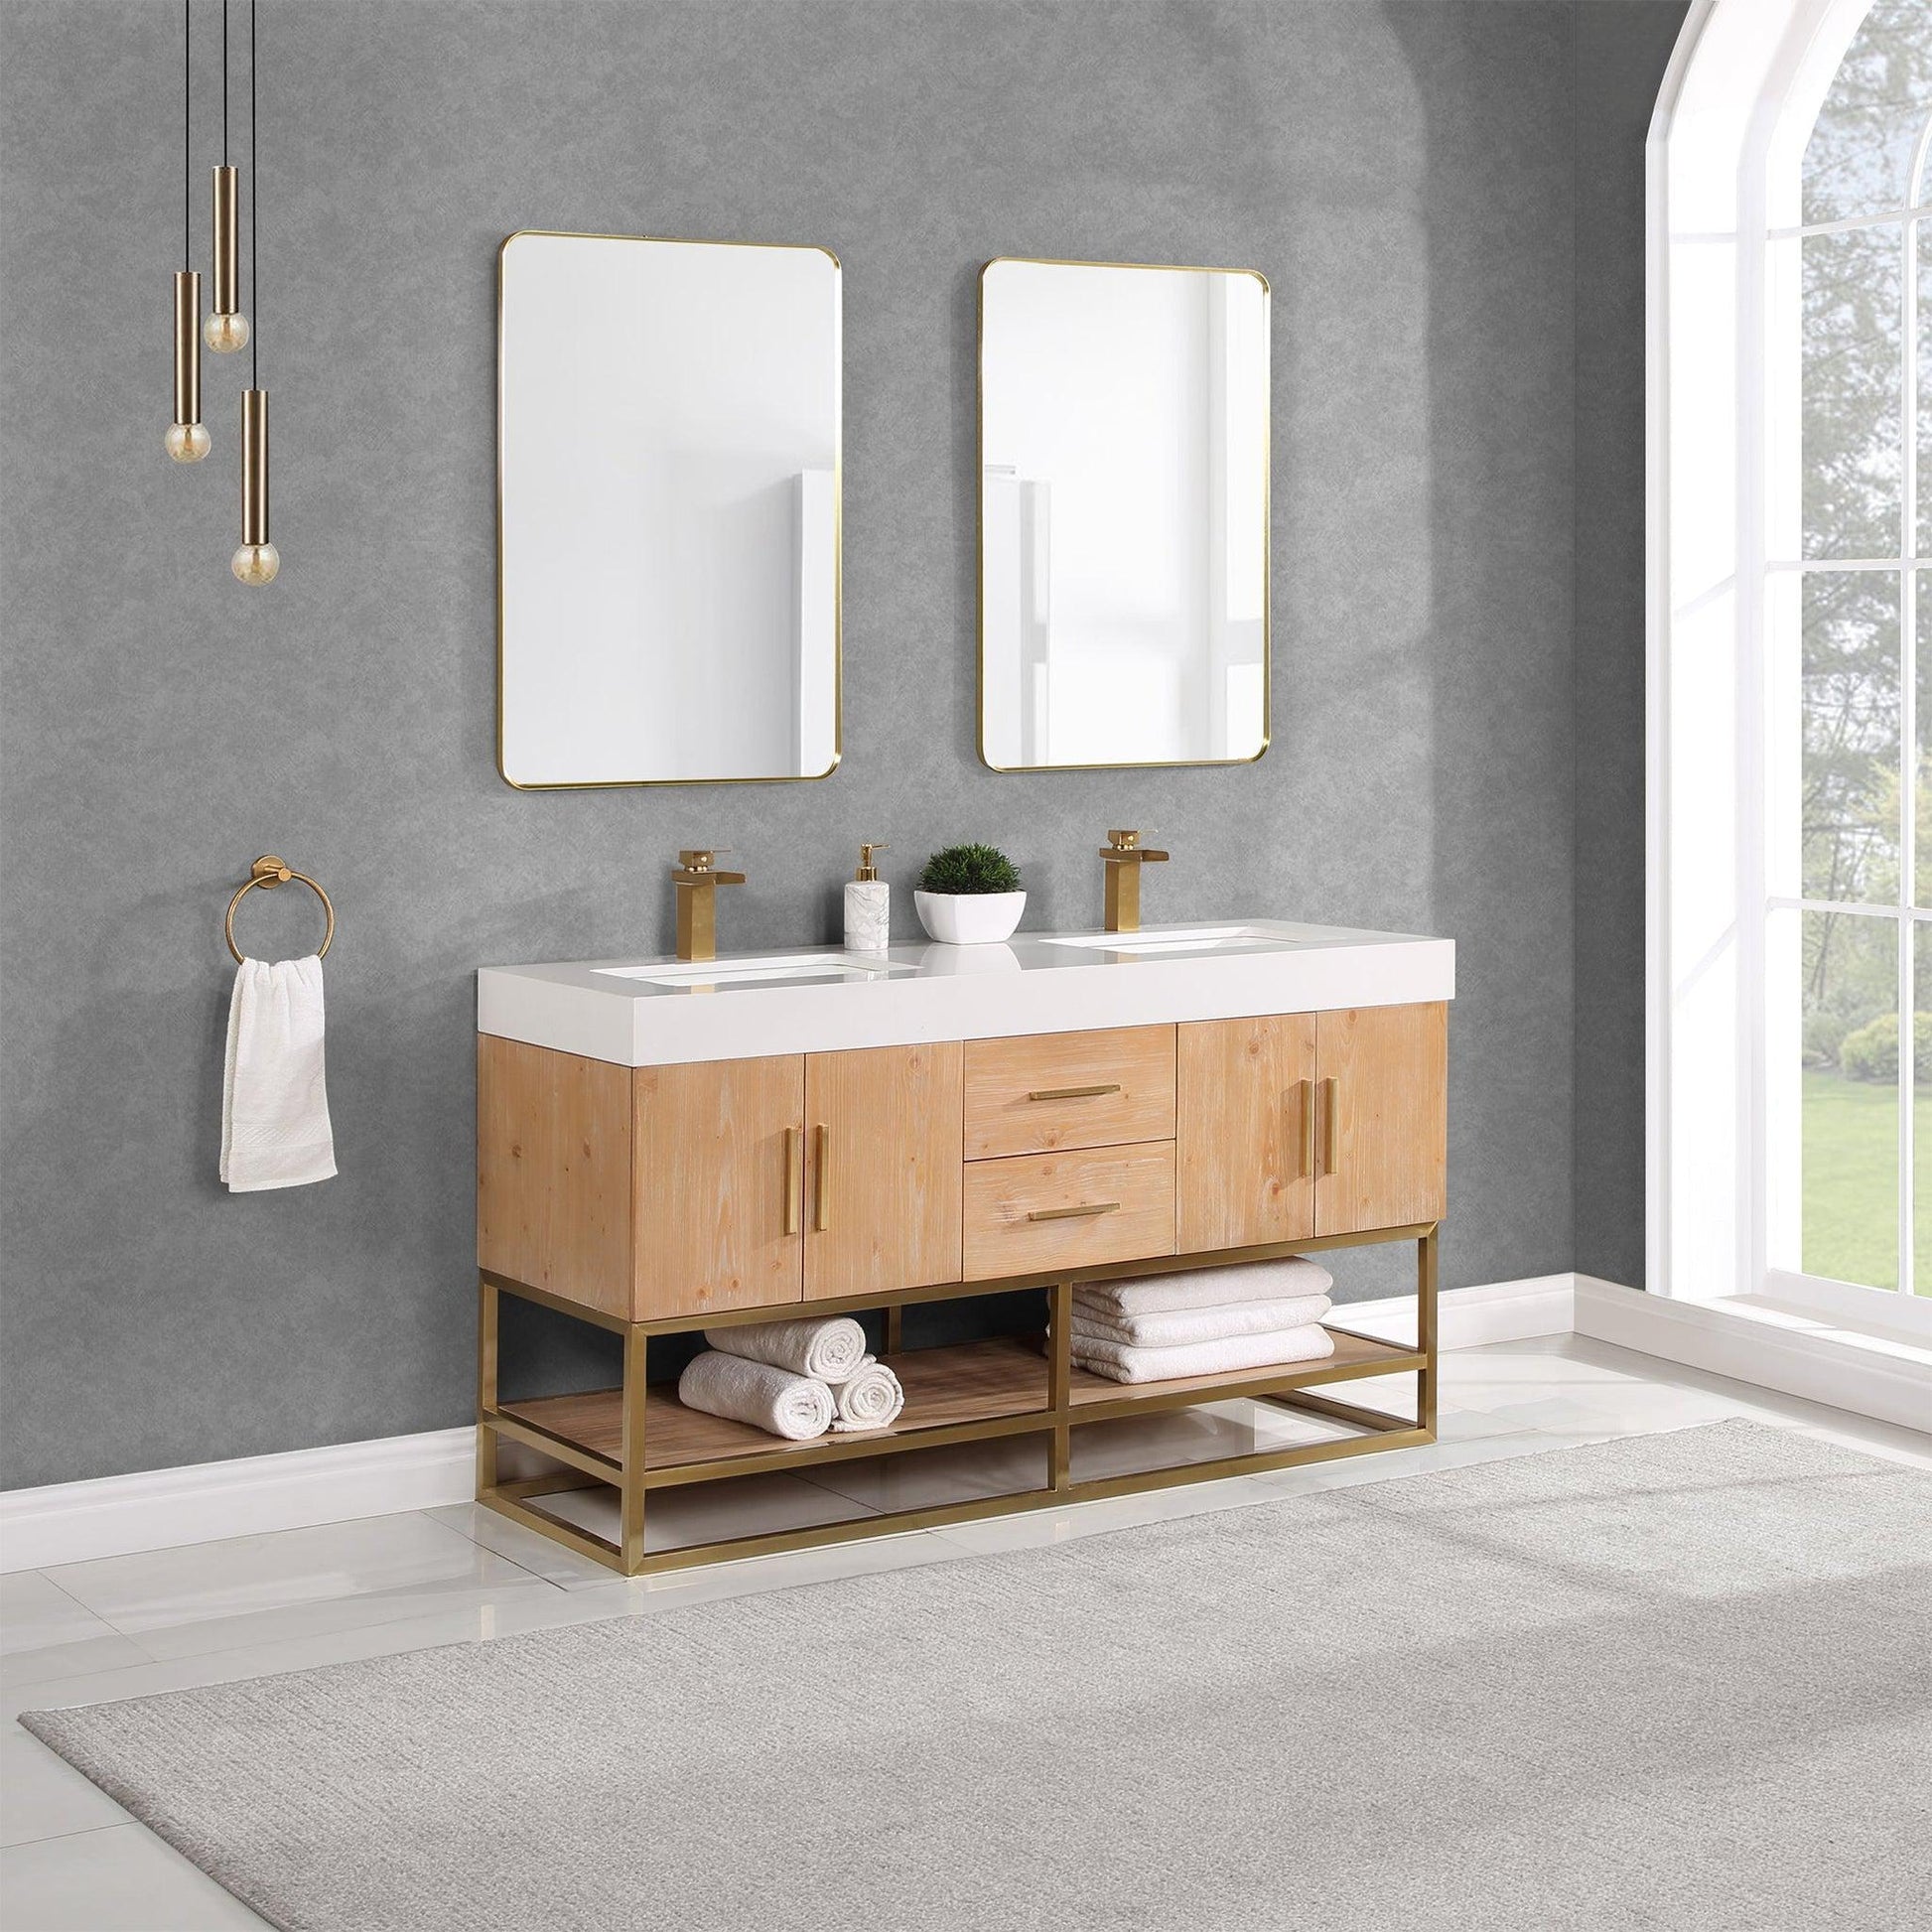 https://usbathstore.com/cdn/shop/files/Altair-Bianco-60-Light-Brown-Freestanding-Double-Bathroom-Vanity-Set-With-Brushed-Gold-Support-Base-White-Composite-Stone-Top-Two-Rectangular-Undermount-Ceramic-Sinks-and-Overflow-12.jpg?v=1688378262&width=1946